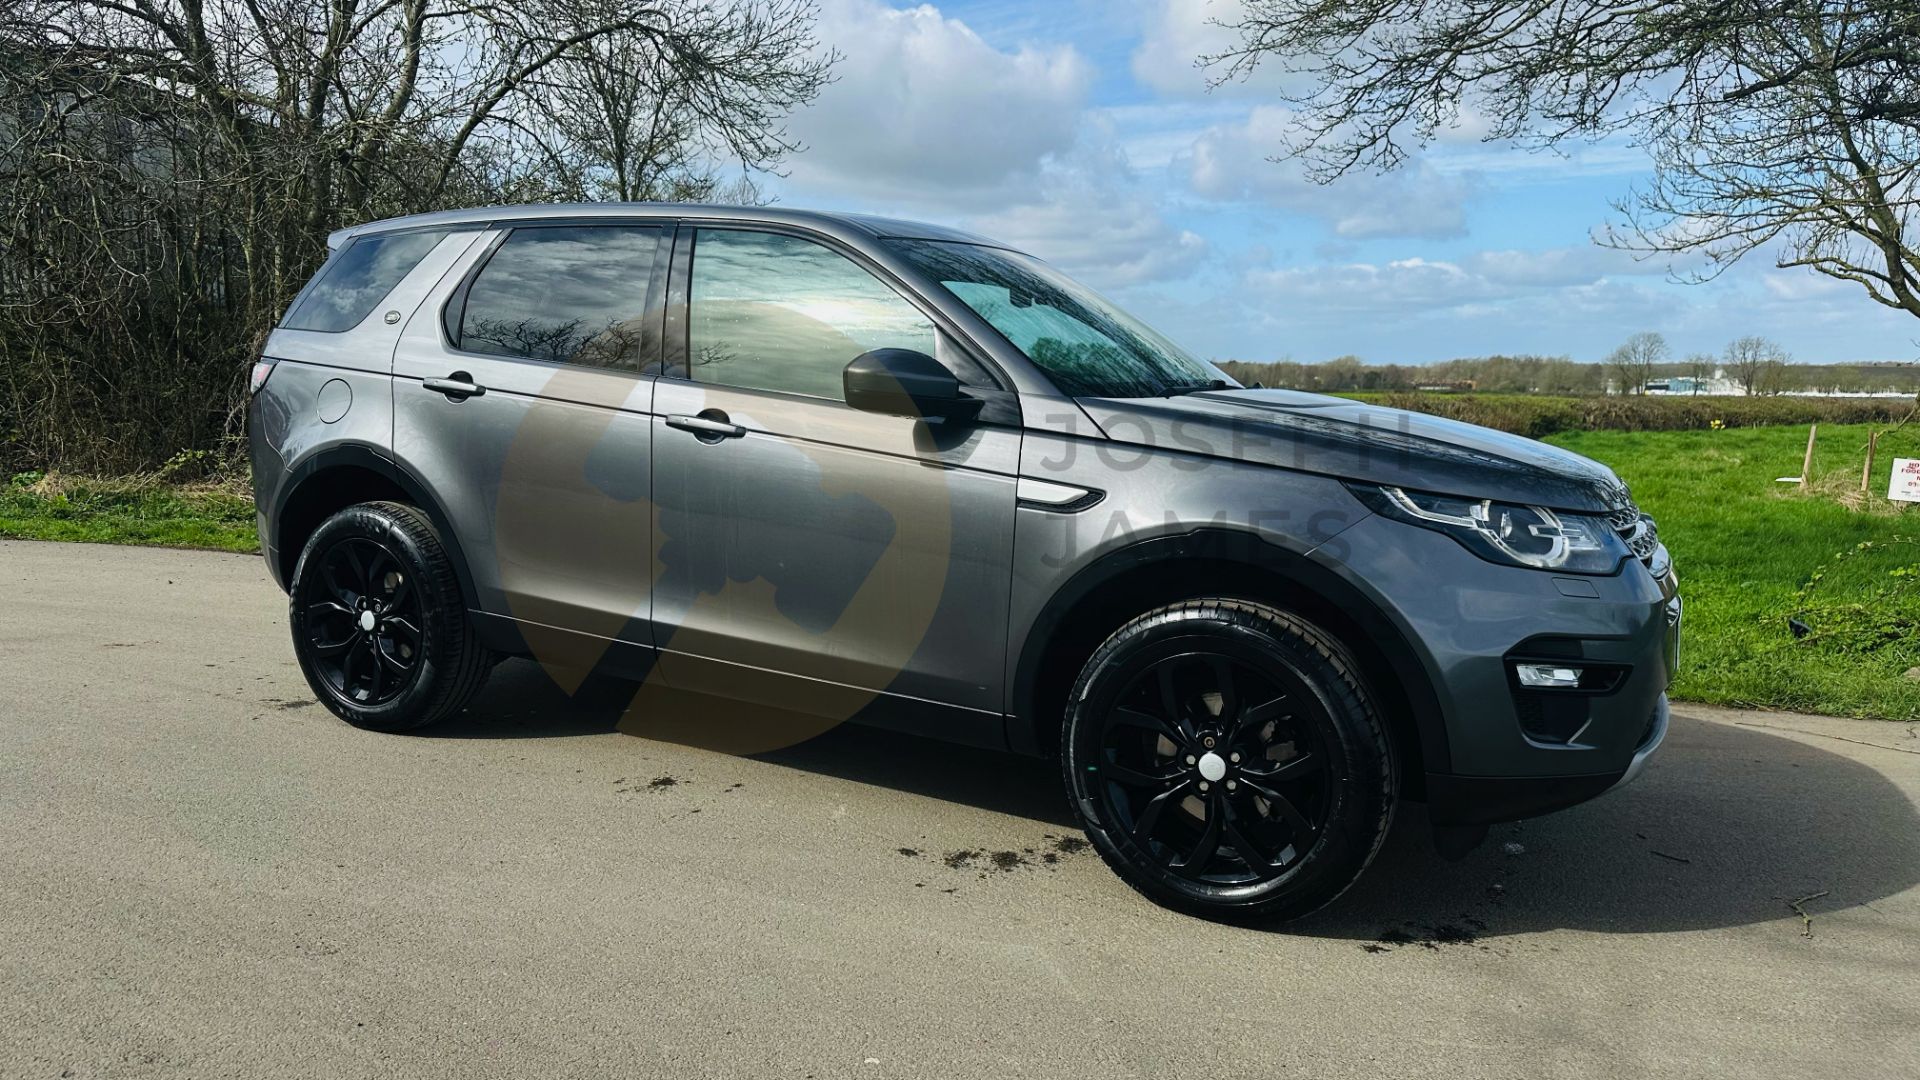 (On Sale) LAND ROVER DISCOVERY SPORT *HSE EDITION* 7 SEATER SUV (2017 - EURO 6) 2.0 TD4 - AUTOMATIC